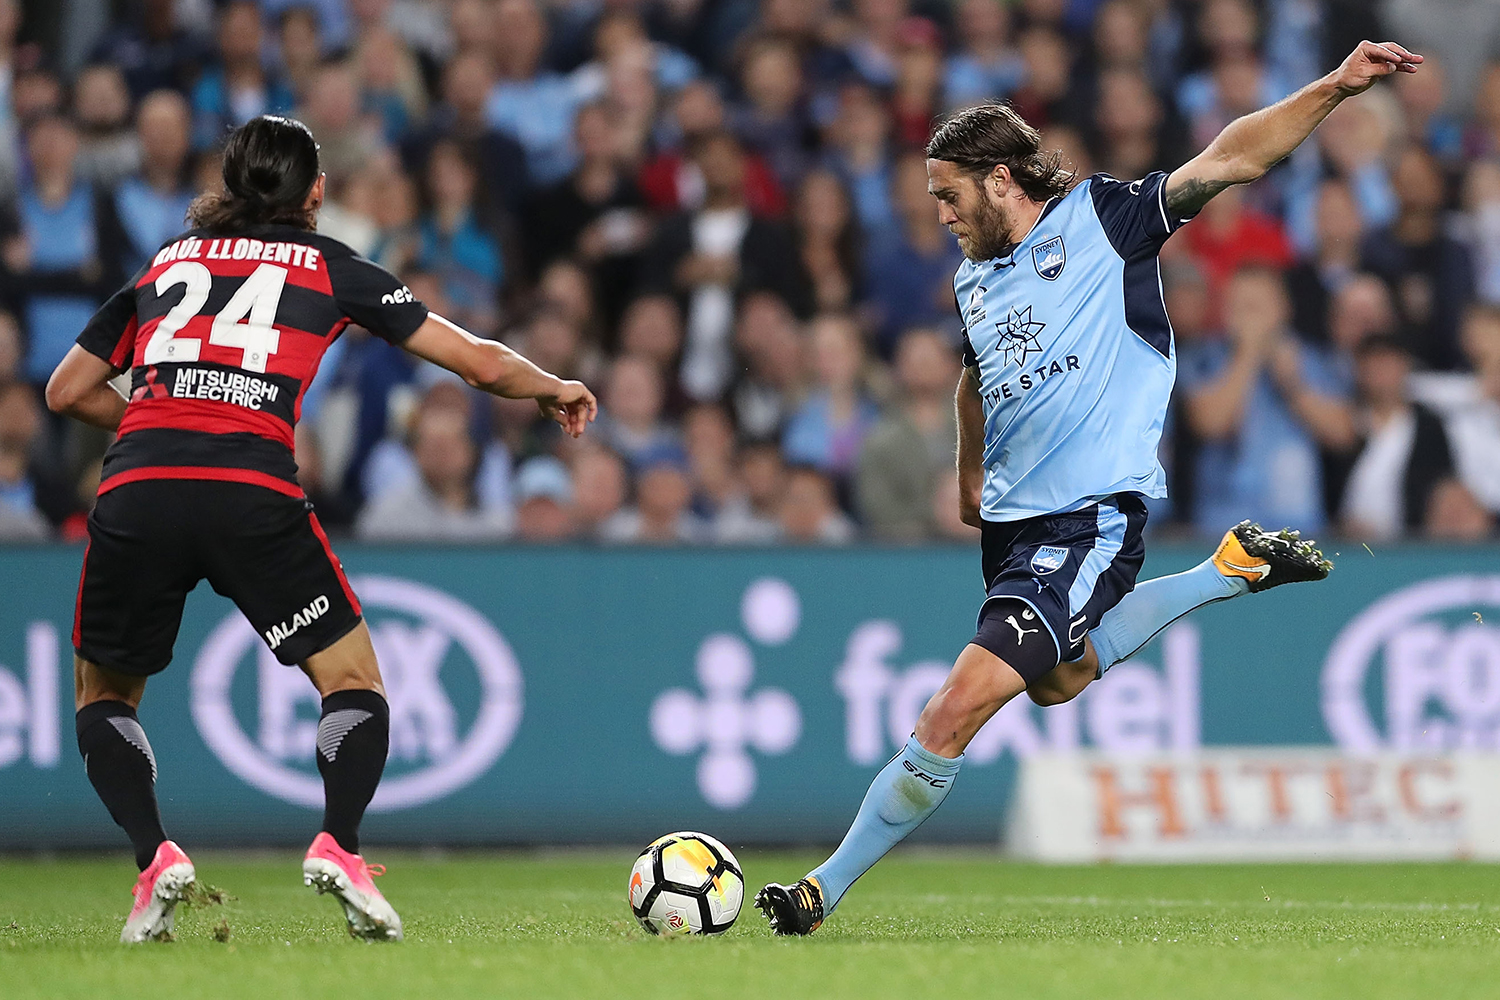 Brillante's strike in the second half earned a share of the spoils at Allianz Stadium.